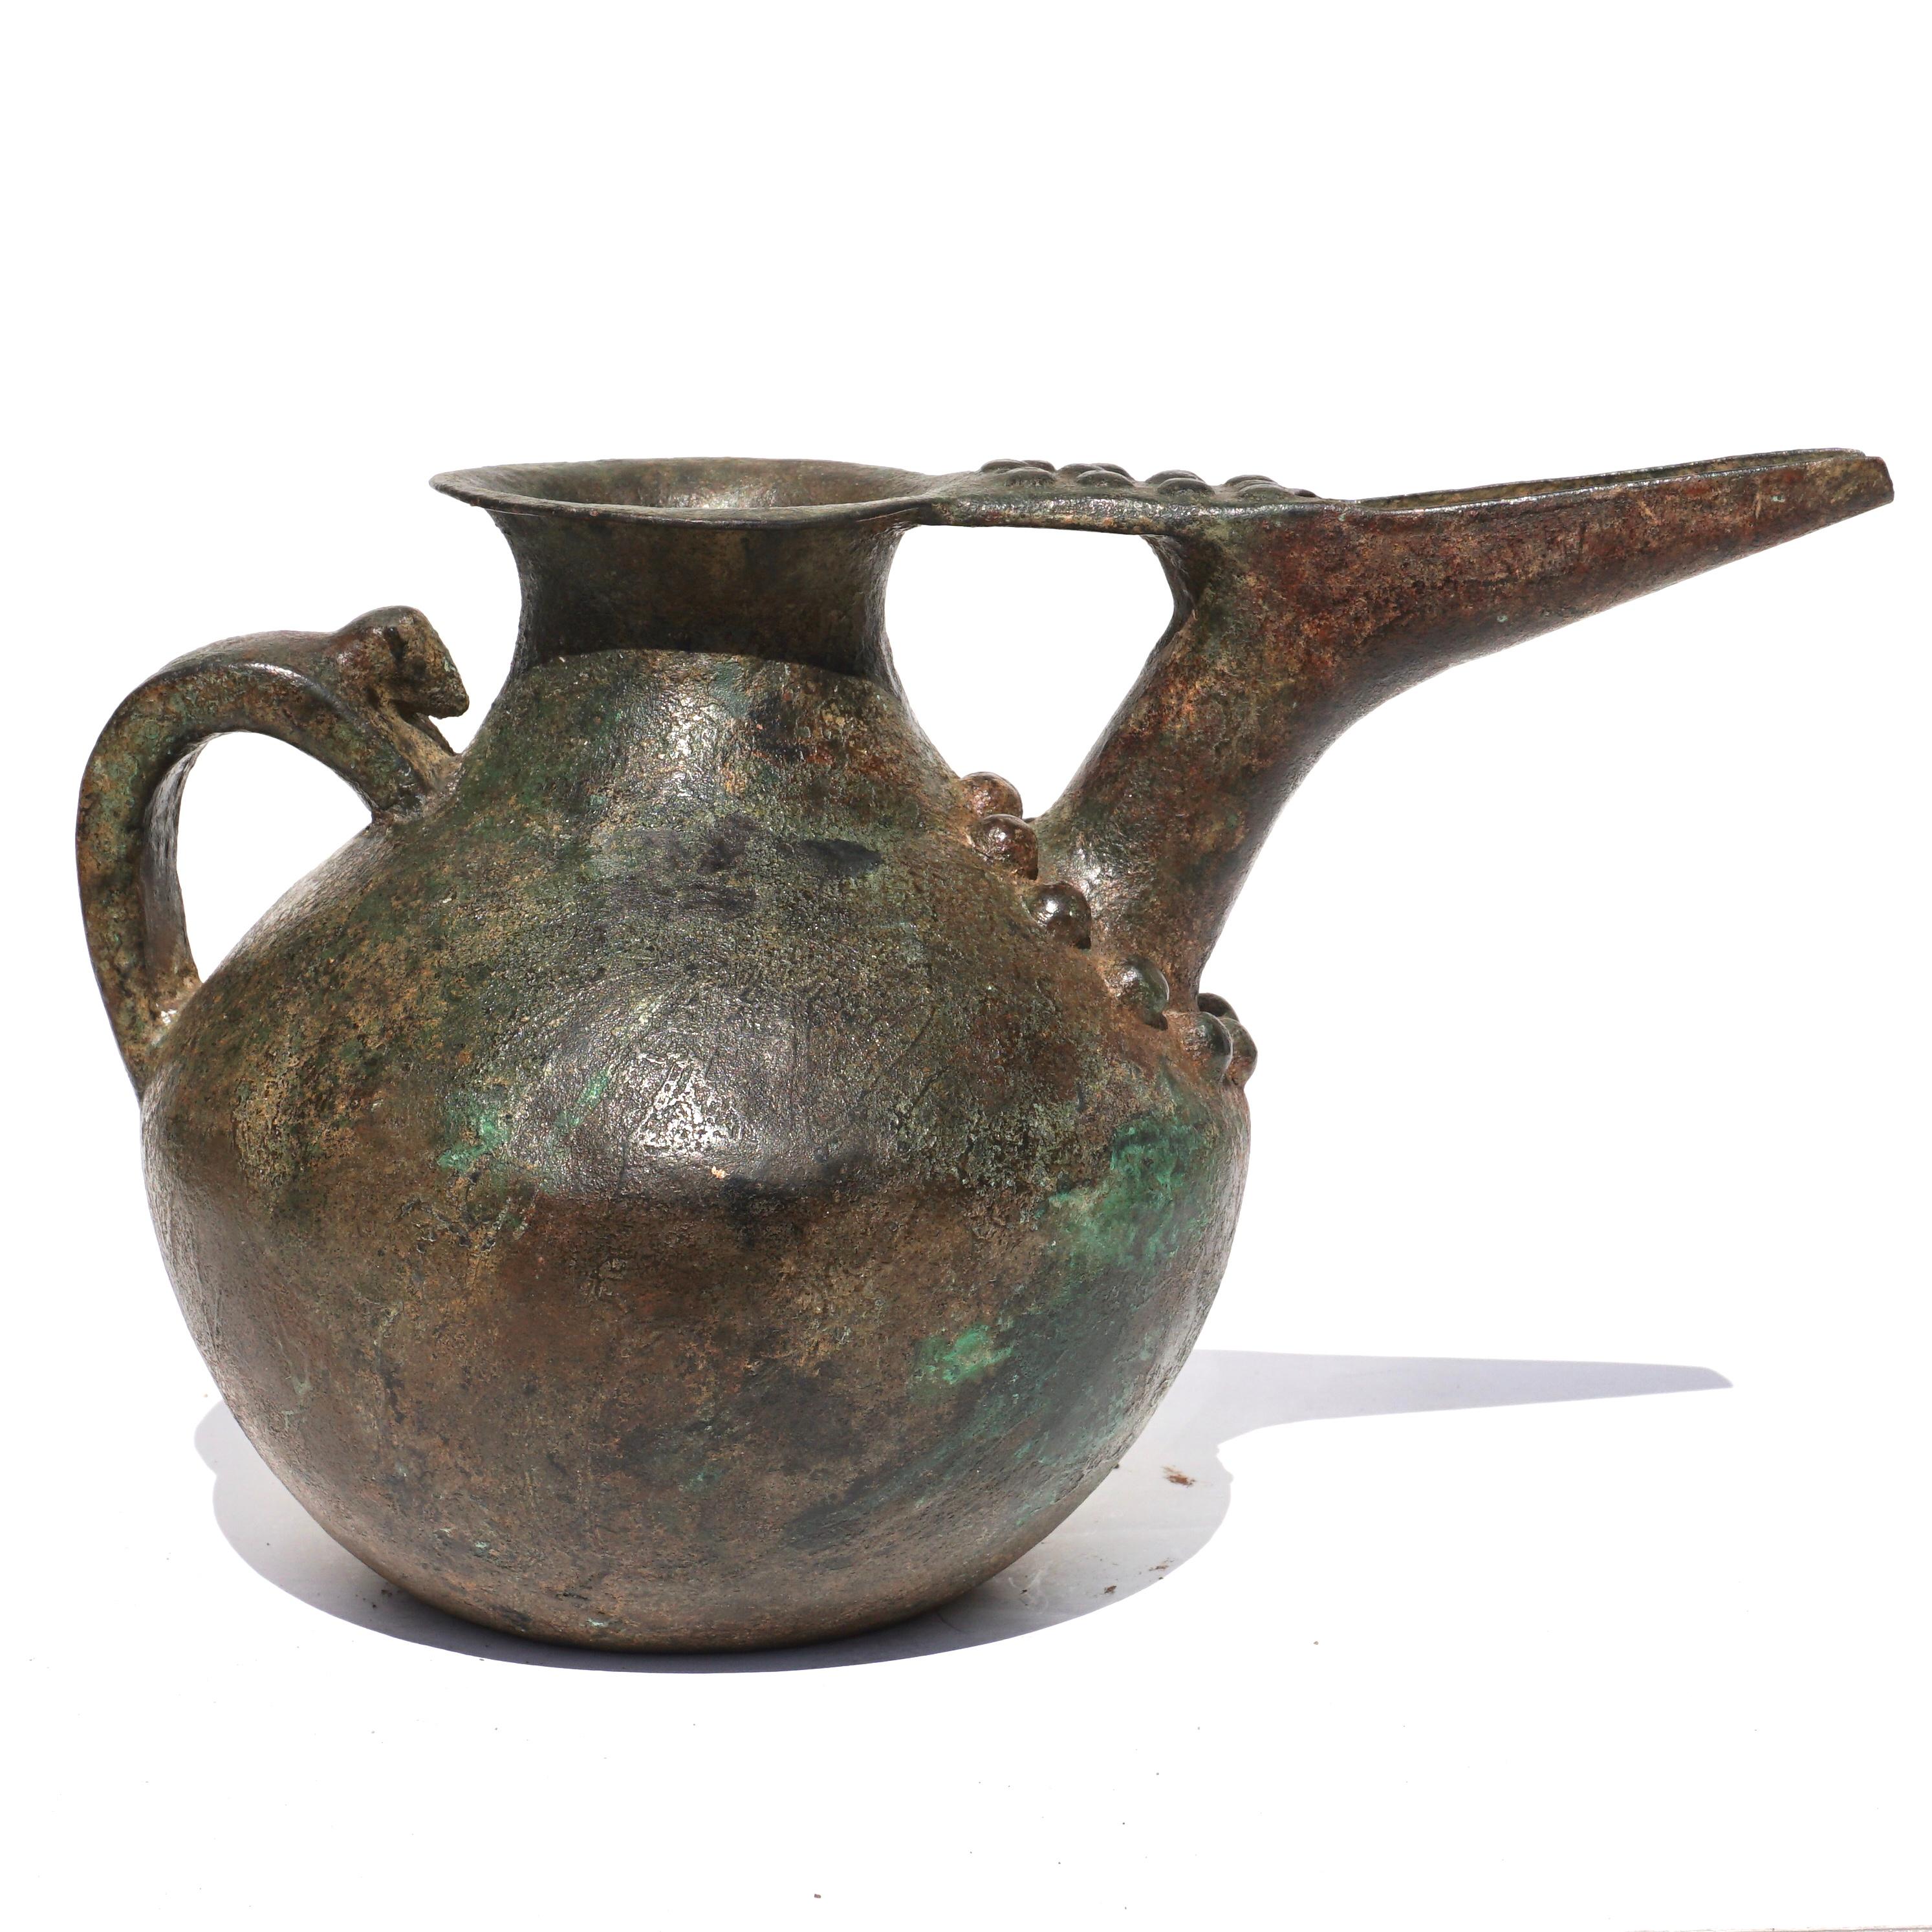 c. 1100- 7th century BC. Western Asiatic. 

Large bulbous bronze vessel with flat base and a long spout. Decorated with hemispherical rivets encircling the base of the spout where it is attached to the vessel and on top of the spout. A ram or mouse